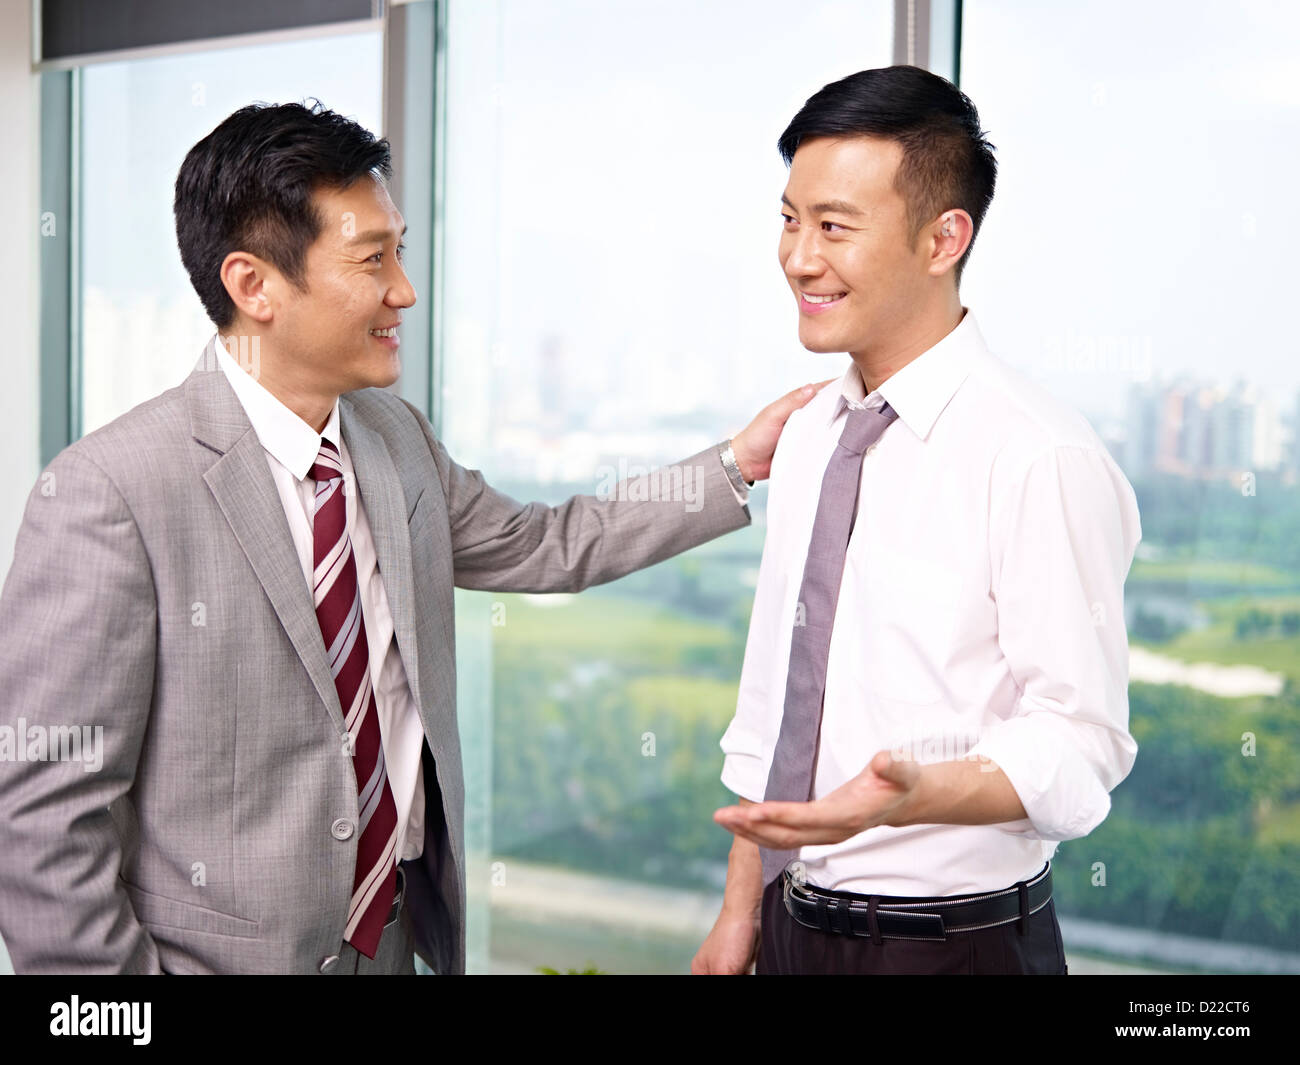 Asian Business People Stock Photo